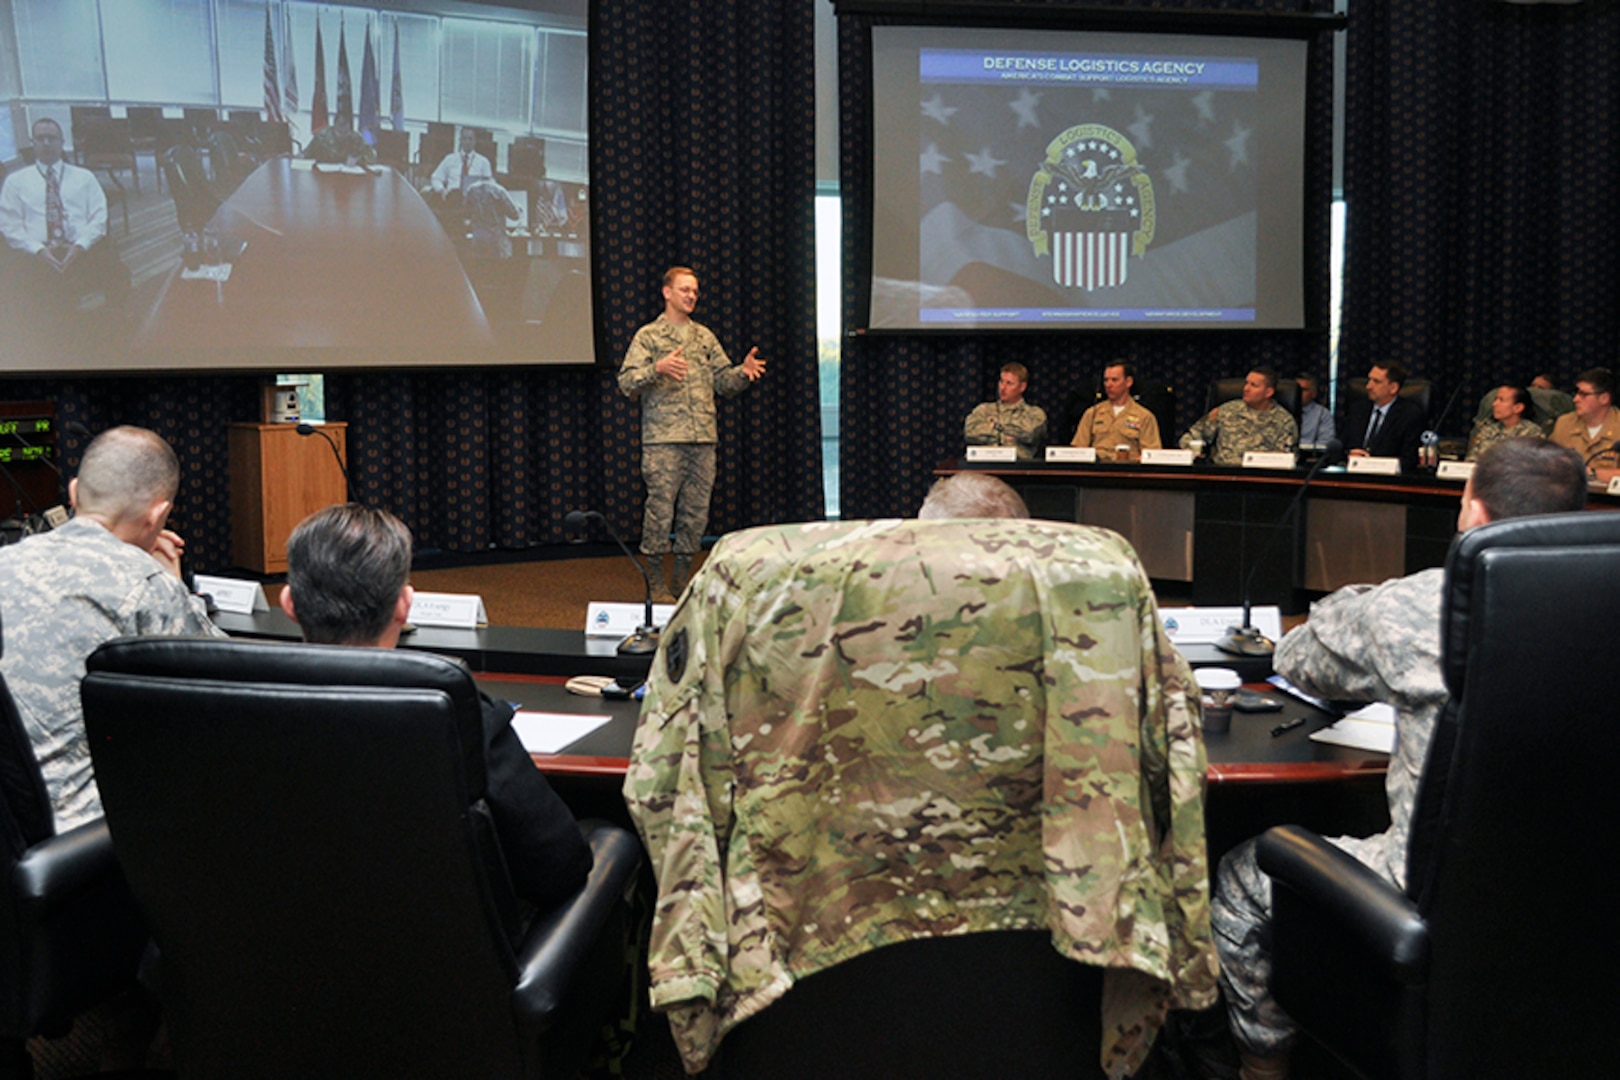 Air Force Brig. Gen. Mark McLeod, Defense Logistics Agency Energy commander, addresses the audience during his opening remarks at the 15th annual Joint Petroleum Seminar at the McNamara Headquarters Complex at Fort Belvoir, Virginia, Jan. 11.